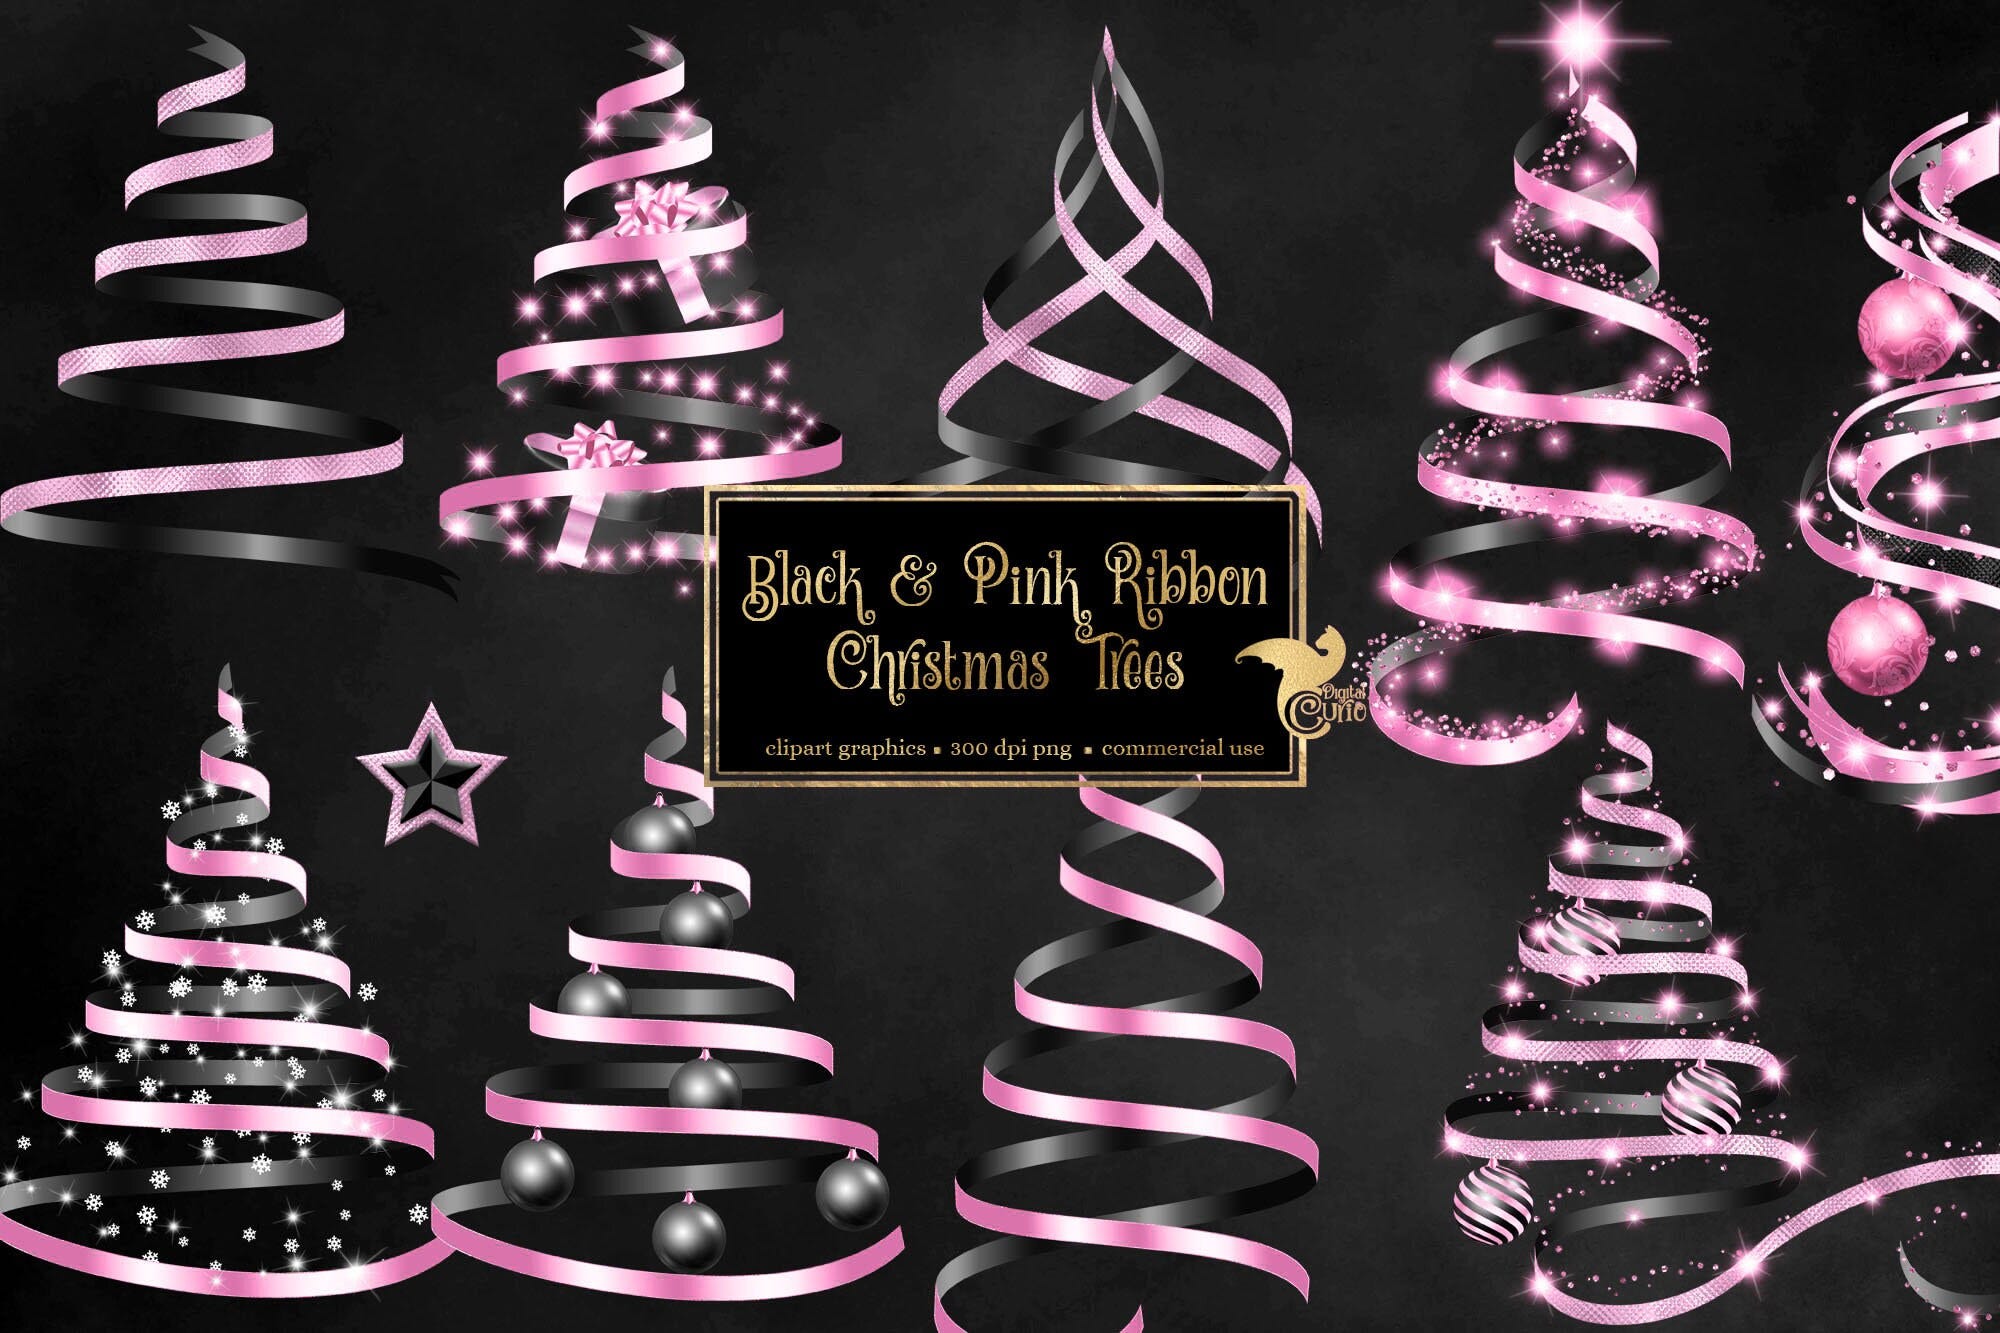 Black and Pink Ribbon Christmas Tree Clip Art - digital holiday glitter png graphics for instant download commercial use